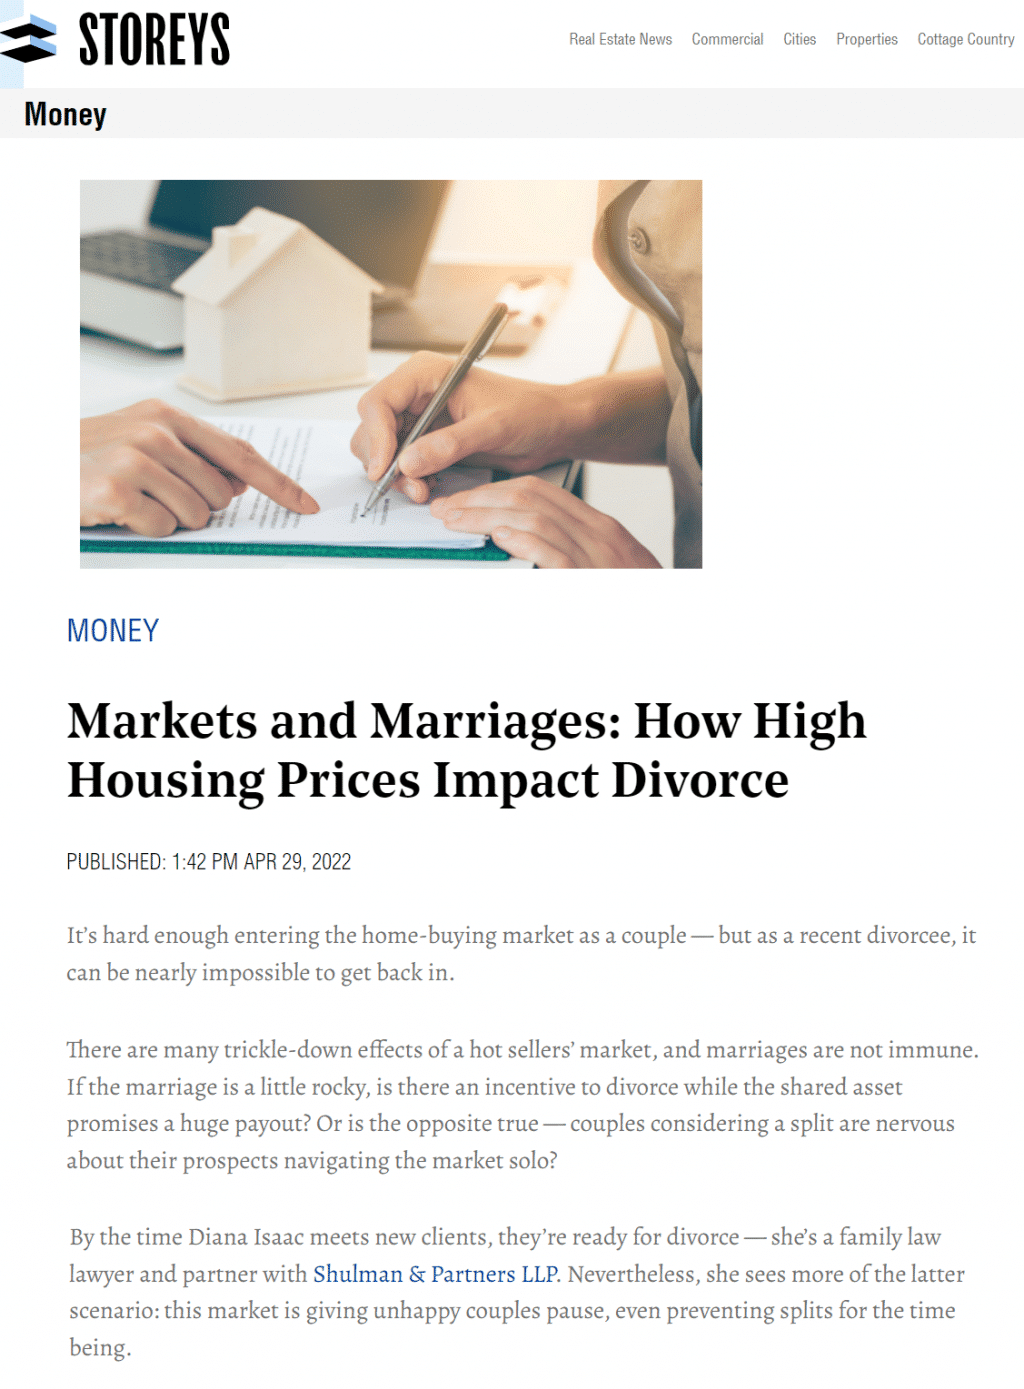 Markets and Marriages: How High Housing Prices Impact Divorce